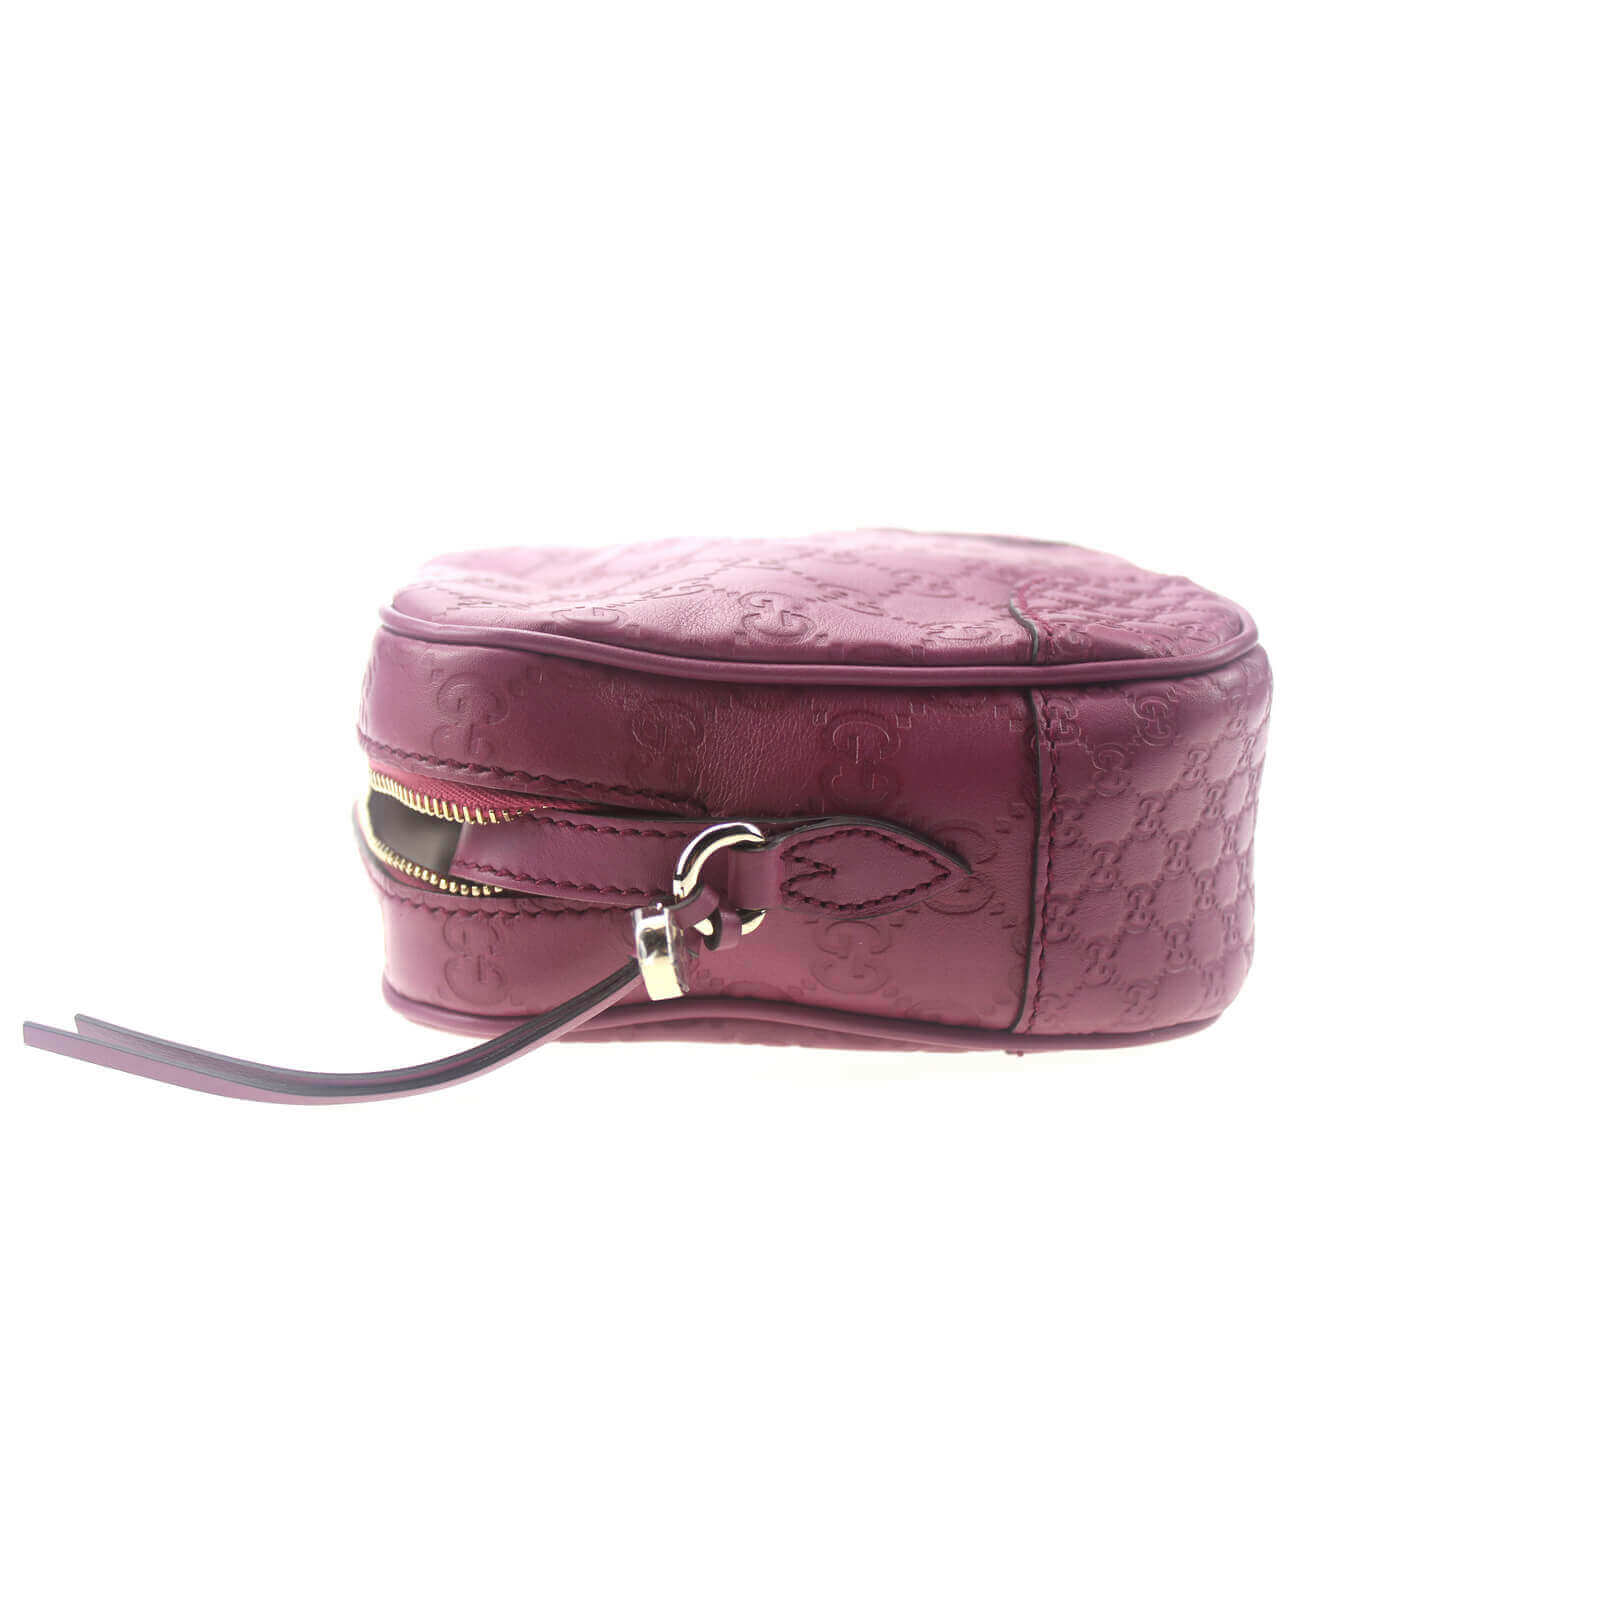 Gucci Crossbody Bag Sale | Guccissima Leather Pink | BagBuyBuy